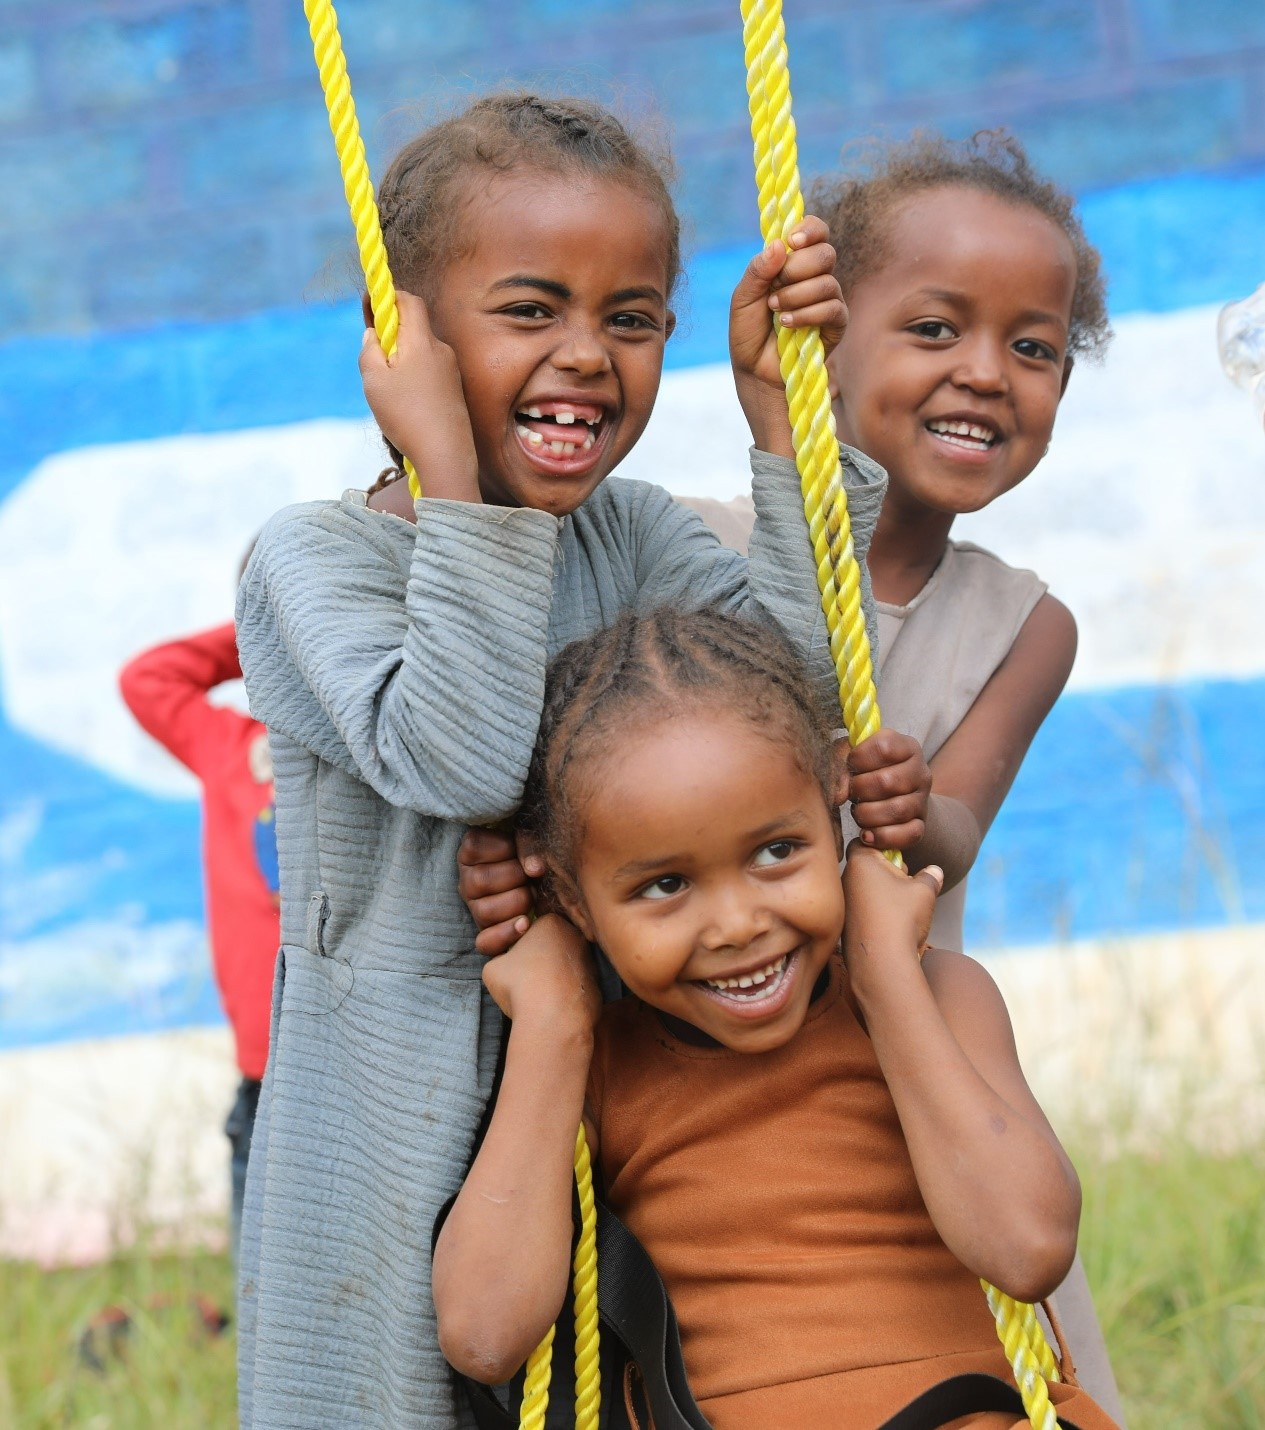 A group of children smile on a swing.